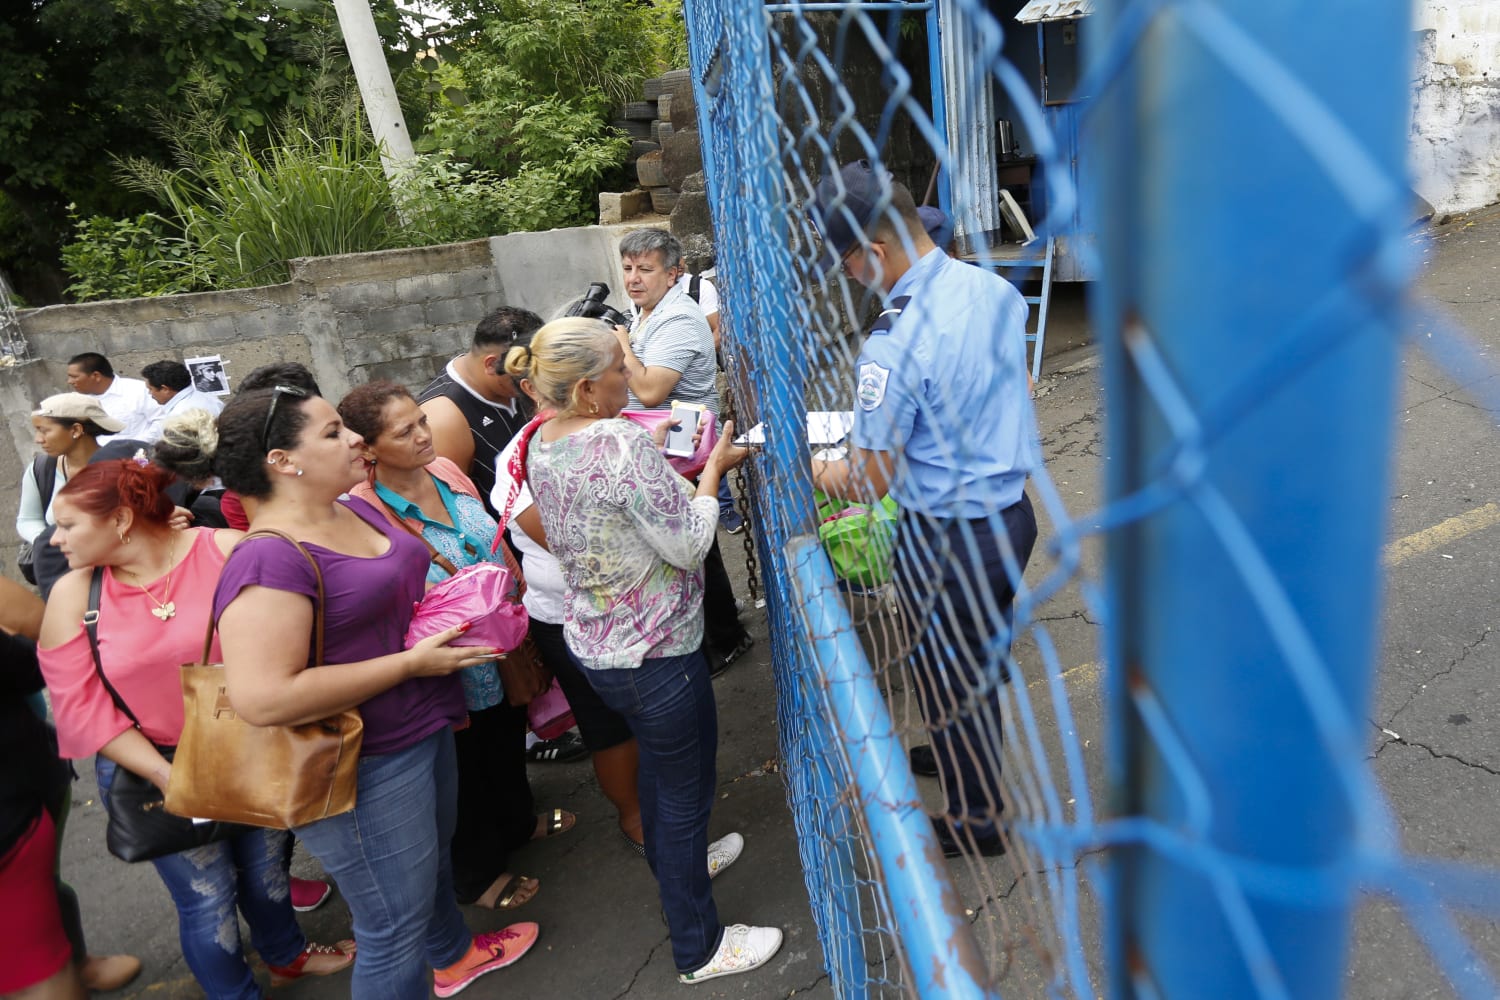 In Nicaragua, families of jailed opposition leaders fear for their relatives' lives  